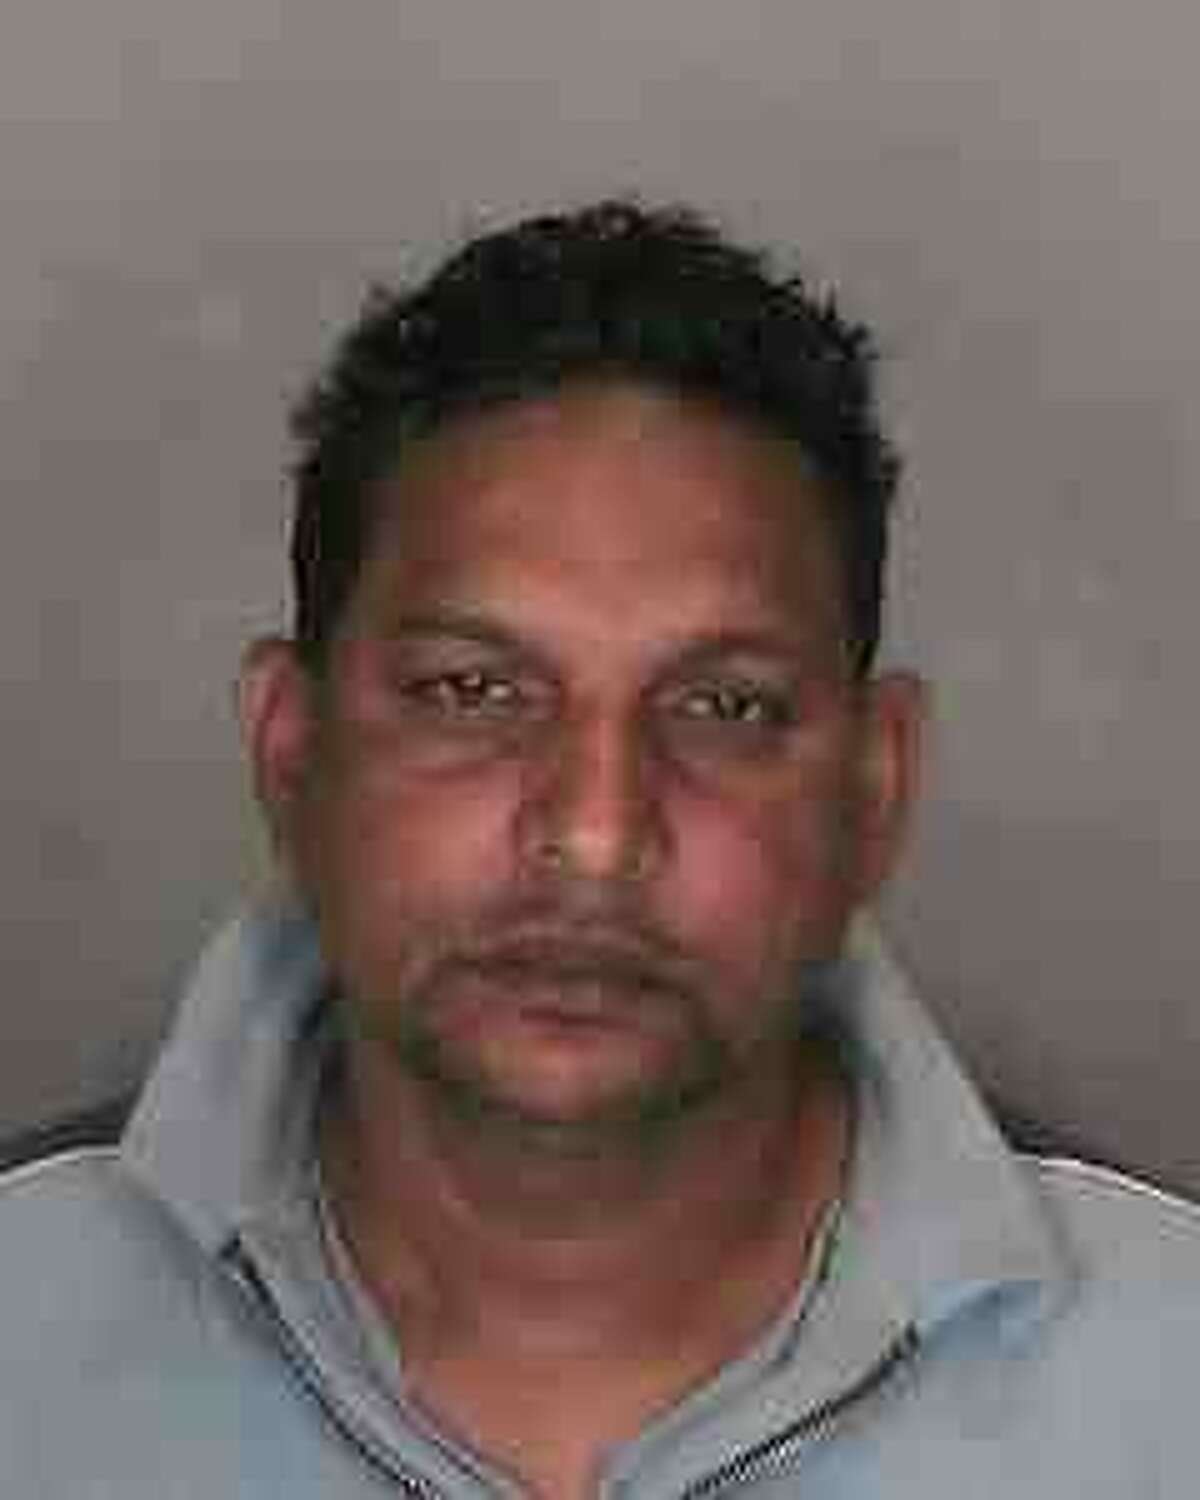 Tarchand Lall, 52, is charged with first-degree murder in alleged contract killing of Charles Dembrosky.